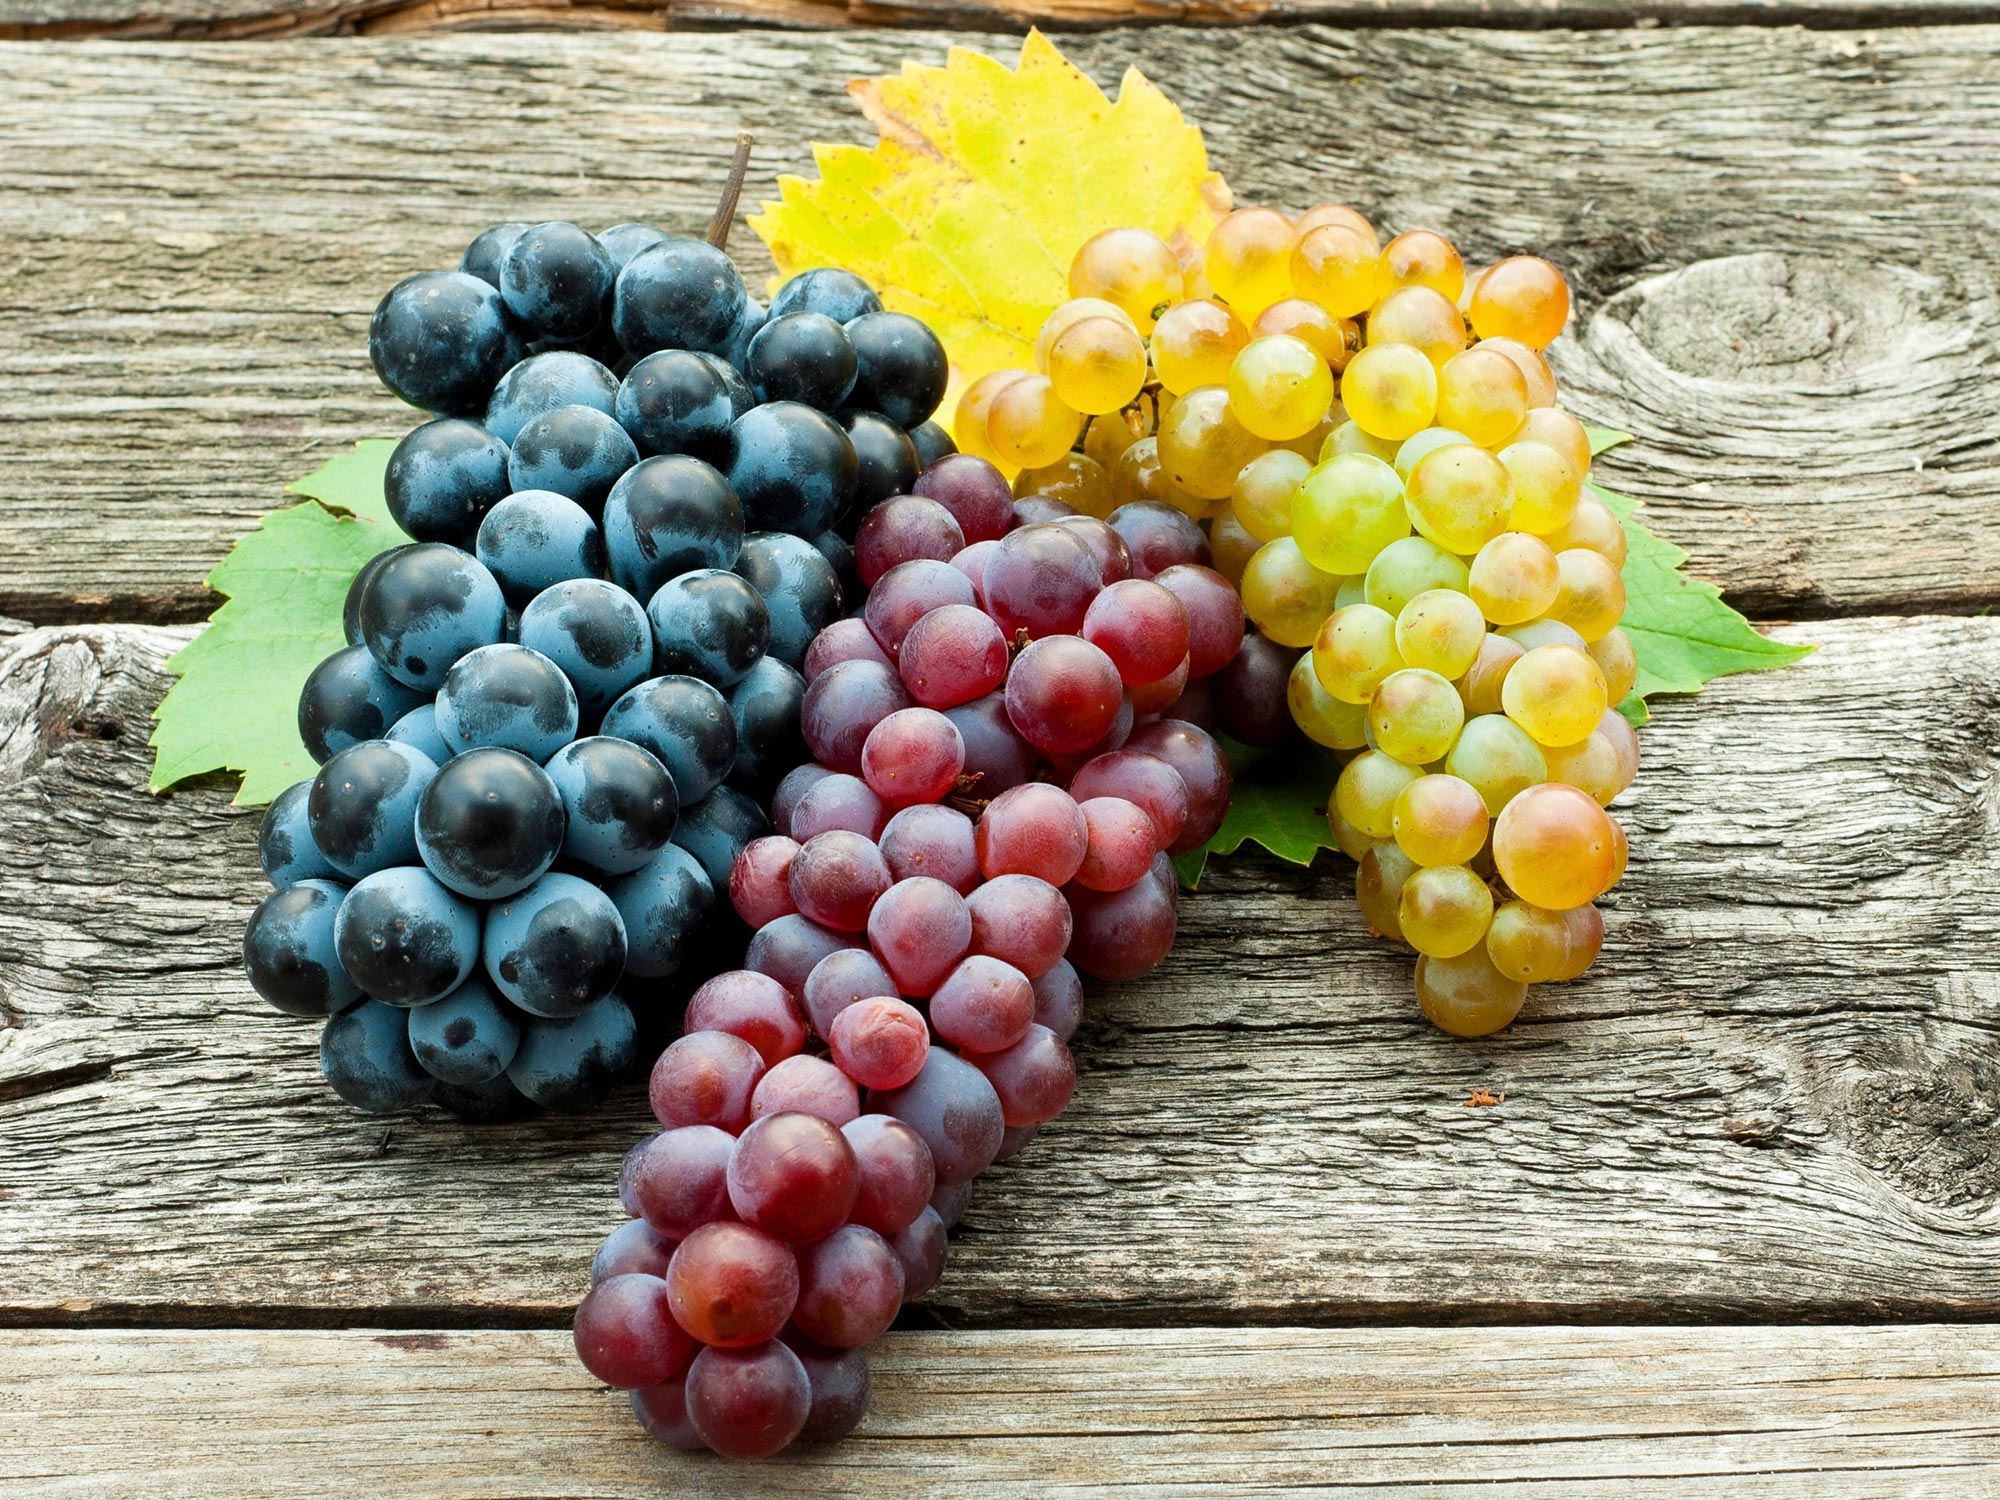 “Astonishing” Results of Grape Consumption and “Exceptional” Impacts on Well being and Lifespans